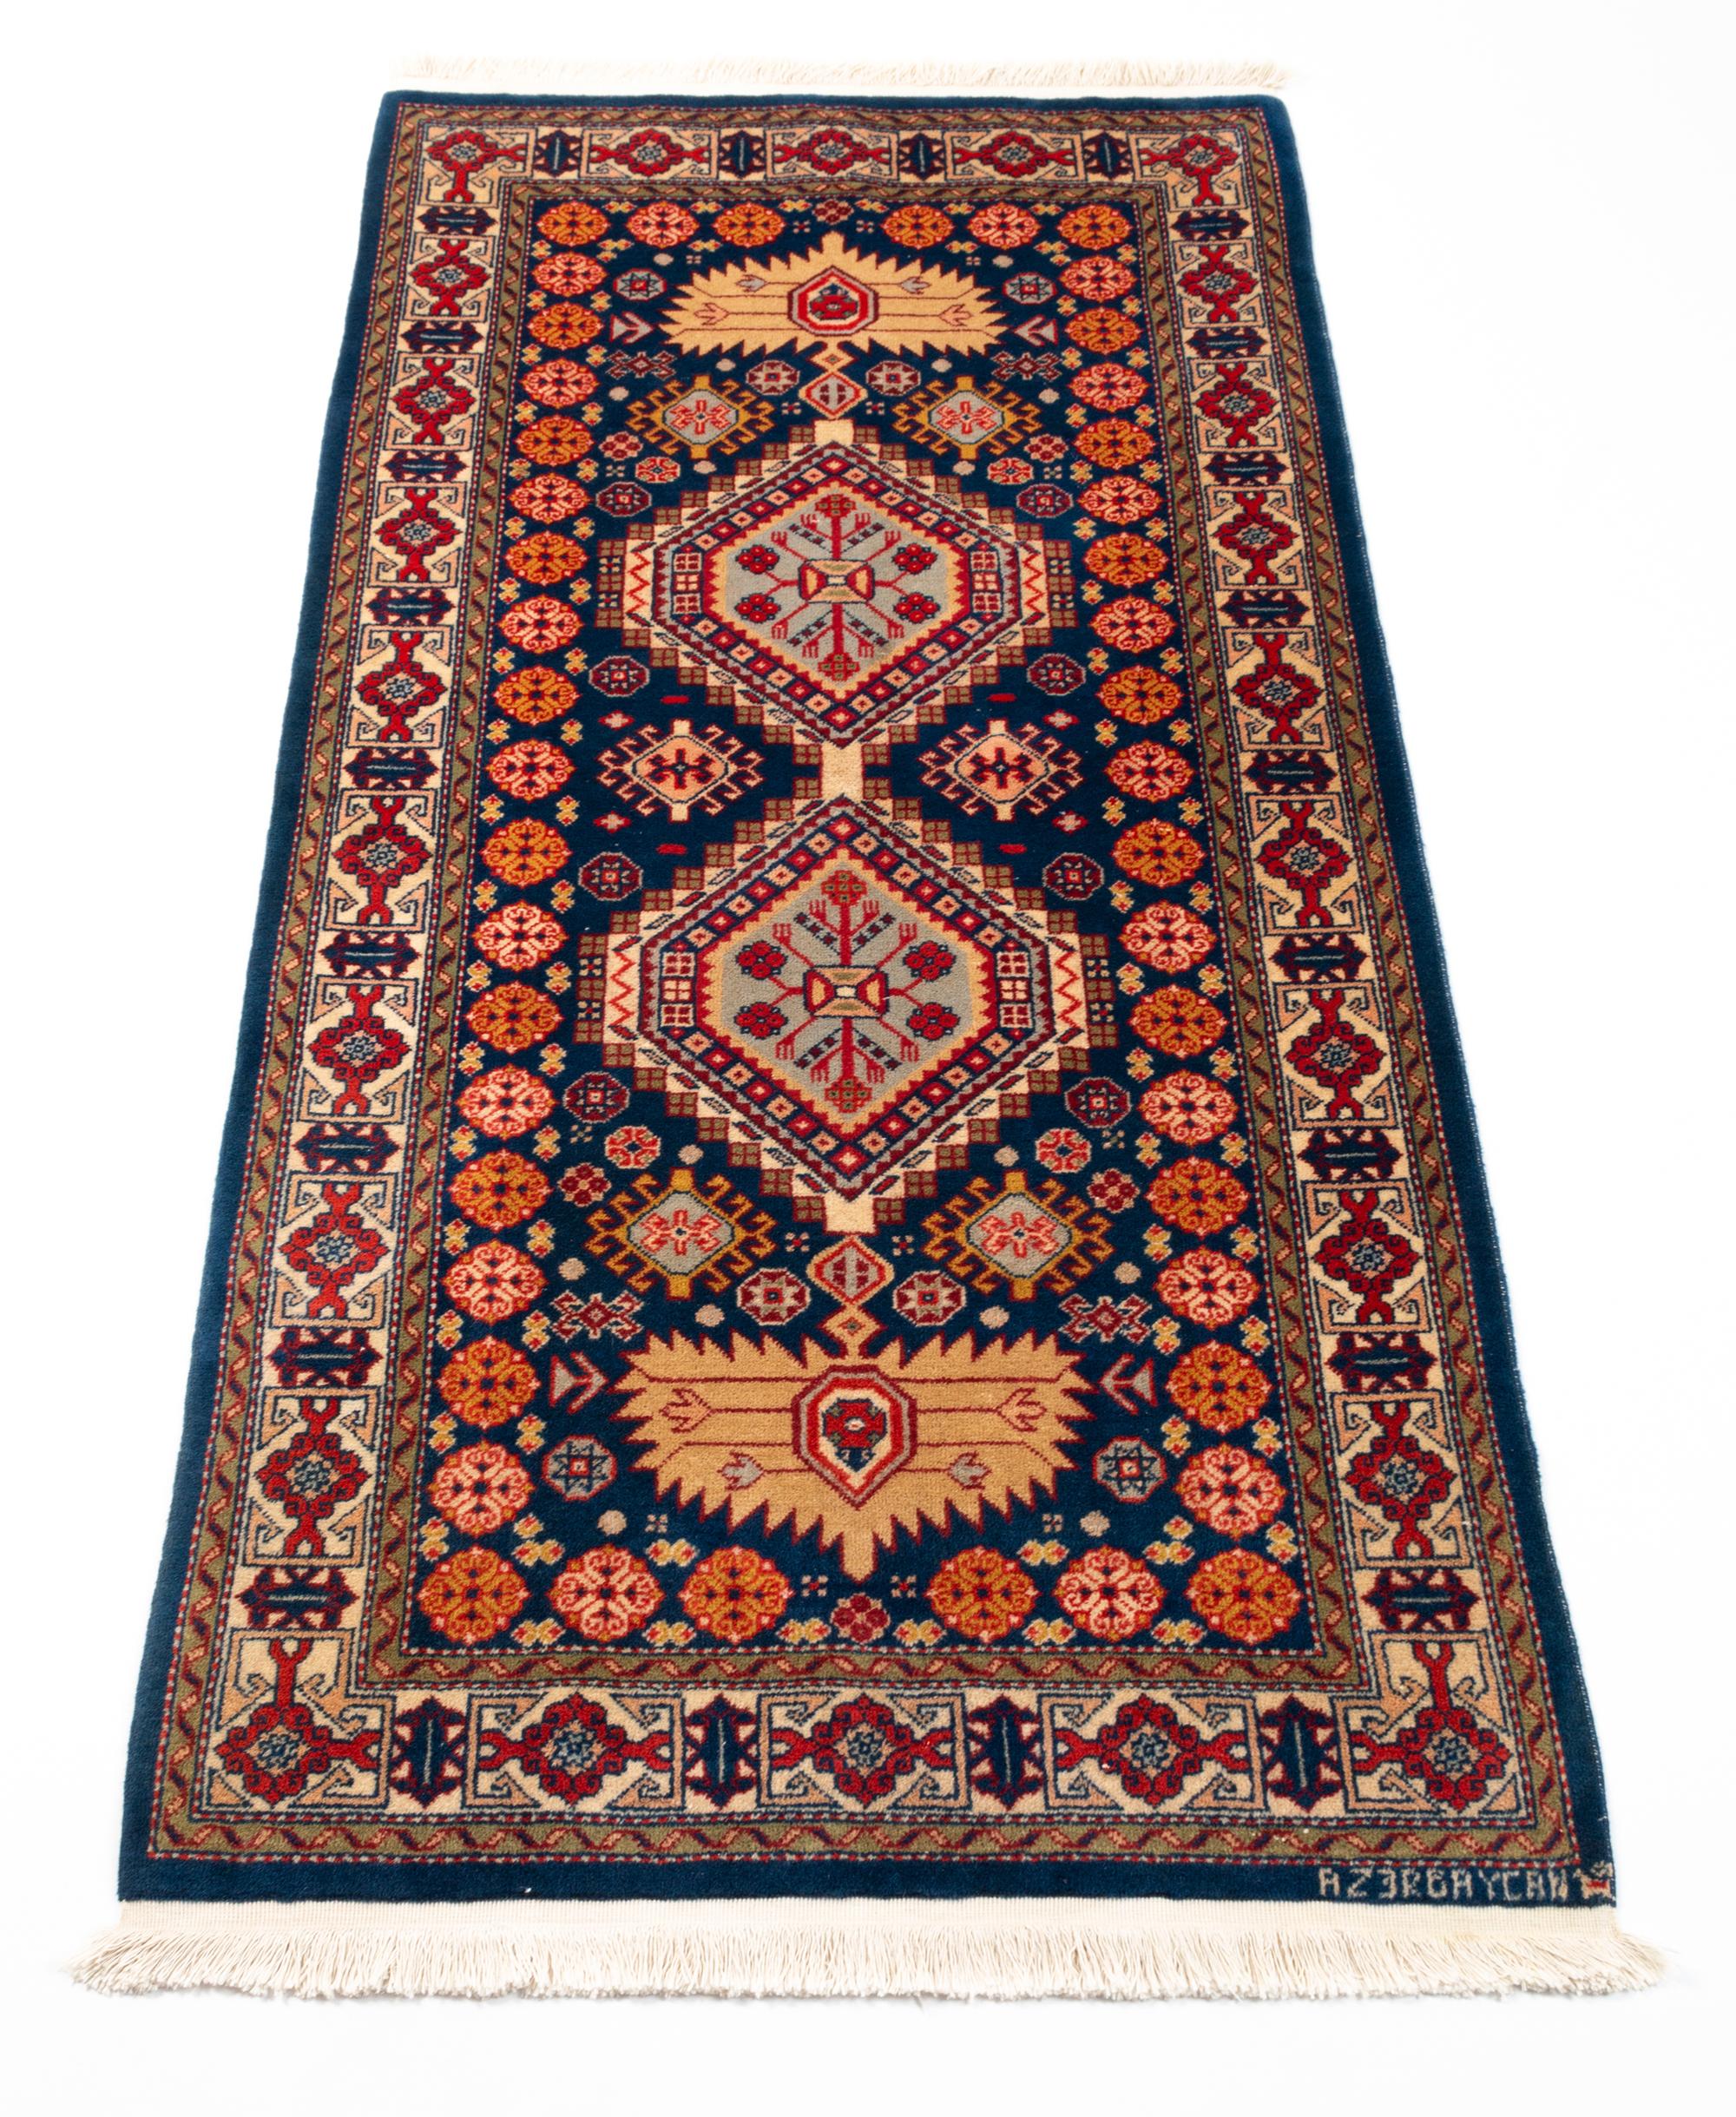 Azerbaijani hand-knotted rug runner geometric design
Wool on a cotton foundation

Measures: 75 x 155 cm 

Produced in Azerbaijan in the mountain chain of Caucasus.
Imaginative geometrical patterns 
Excellent condition.

